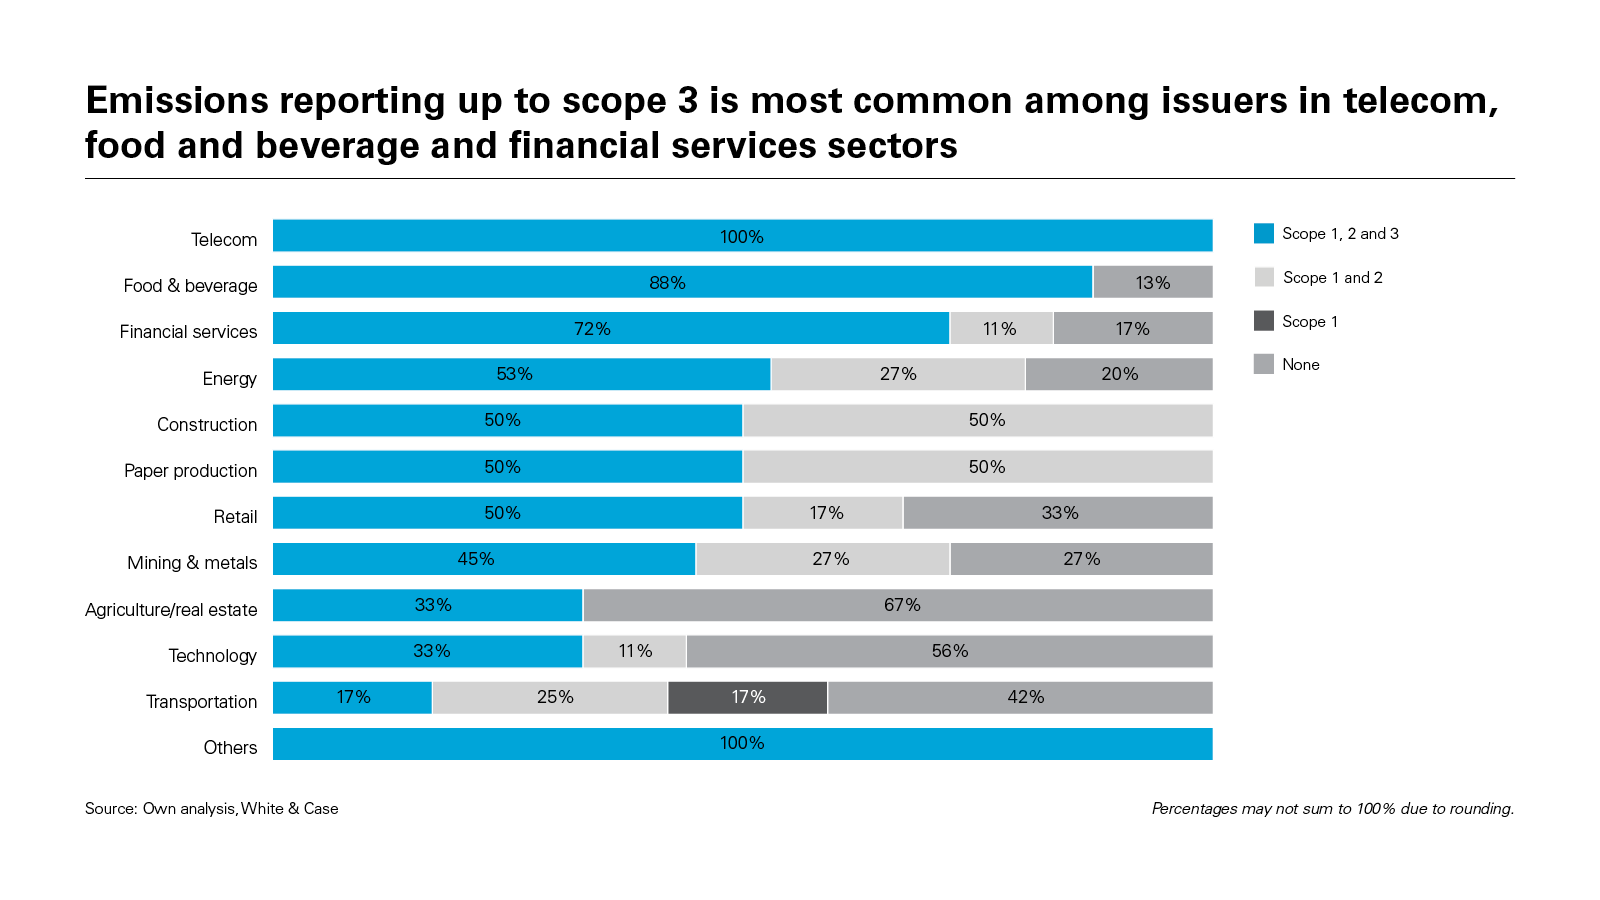 Emissions reporting up to scope 3 is most common among issuers in telecom, food and beverage and financial services sectors 